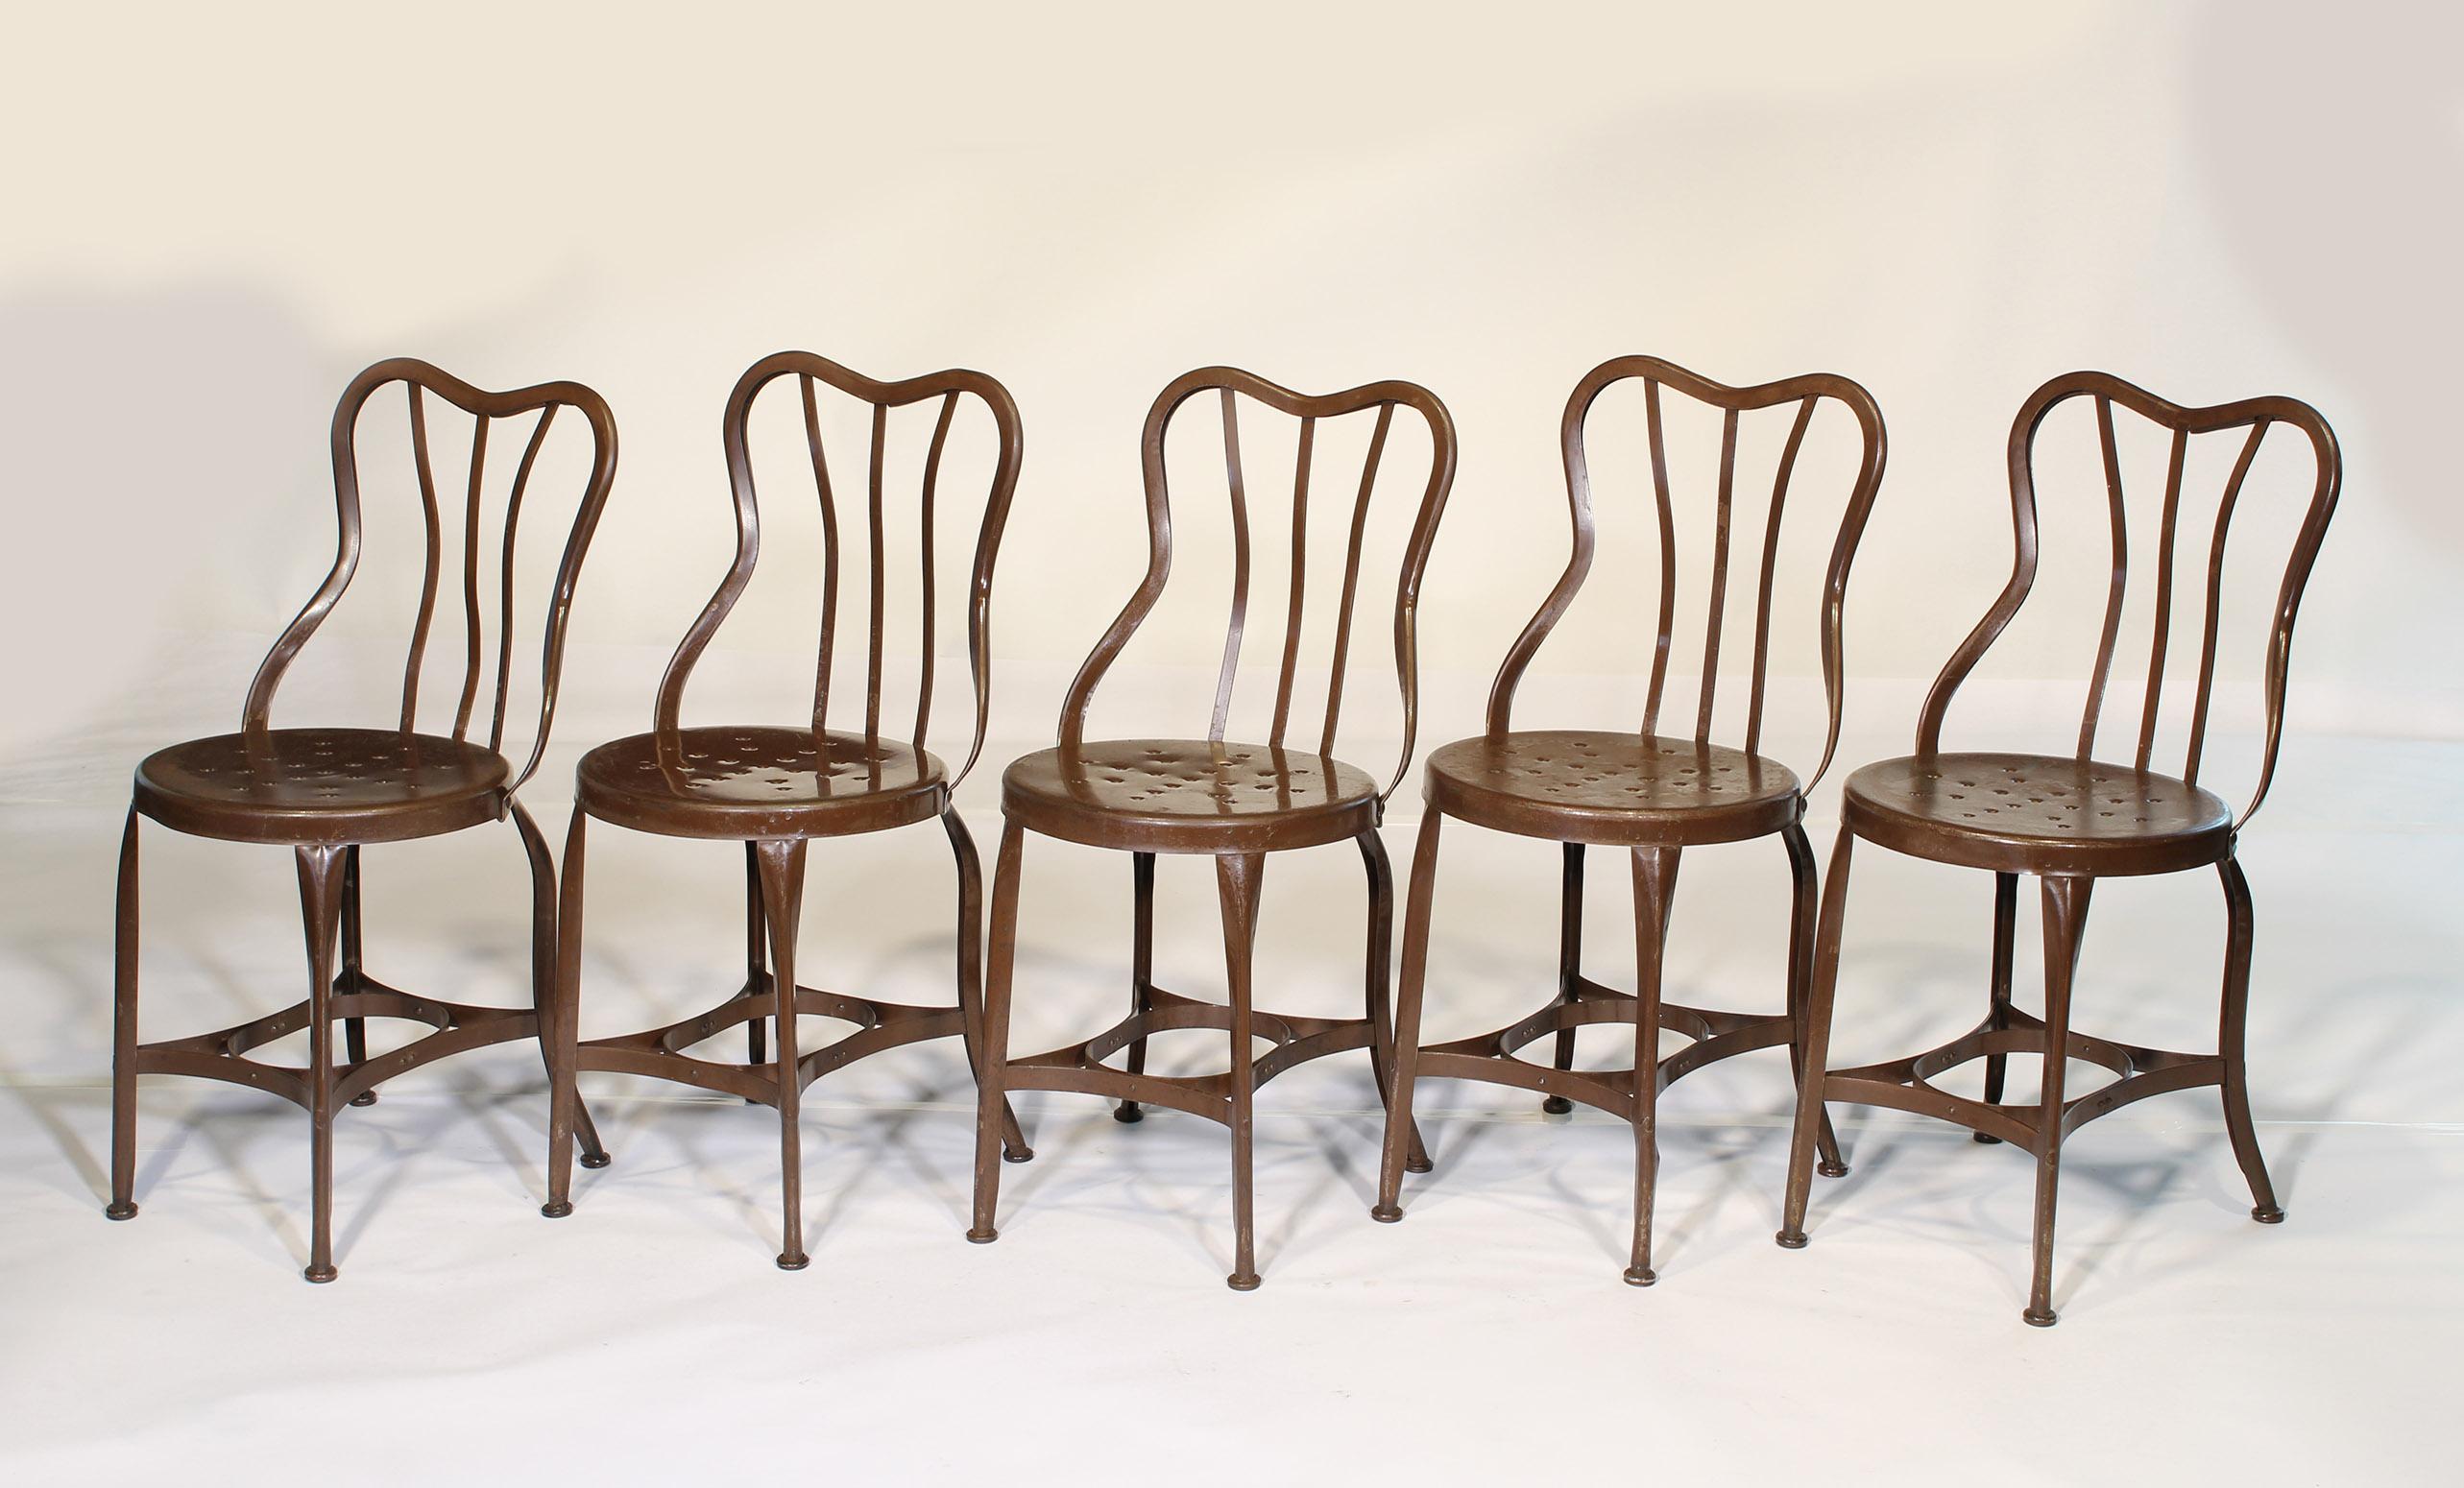 Authentic set of five 1920s steel cafe / ice cream chairs by Toledo. Distressed brown paint with gliders and sloped perforated seats. All chairs have been cleaned and checked for stability. Measurements: 31 7/8